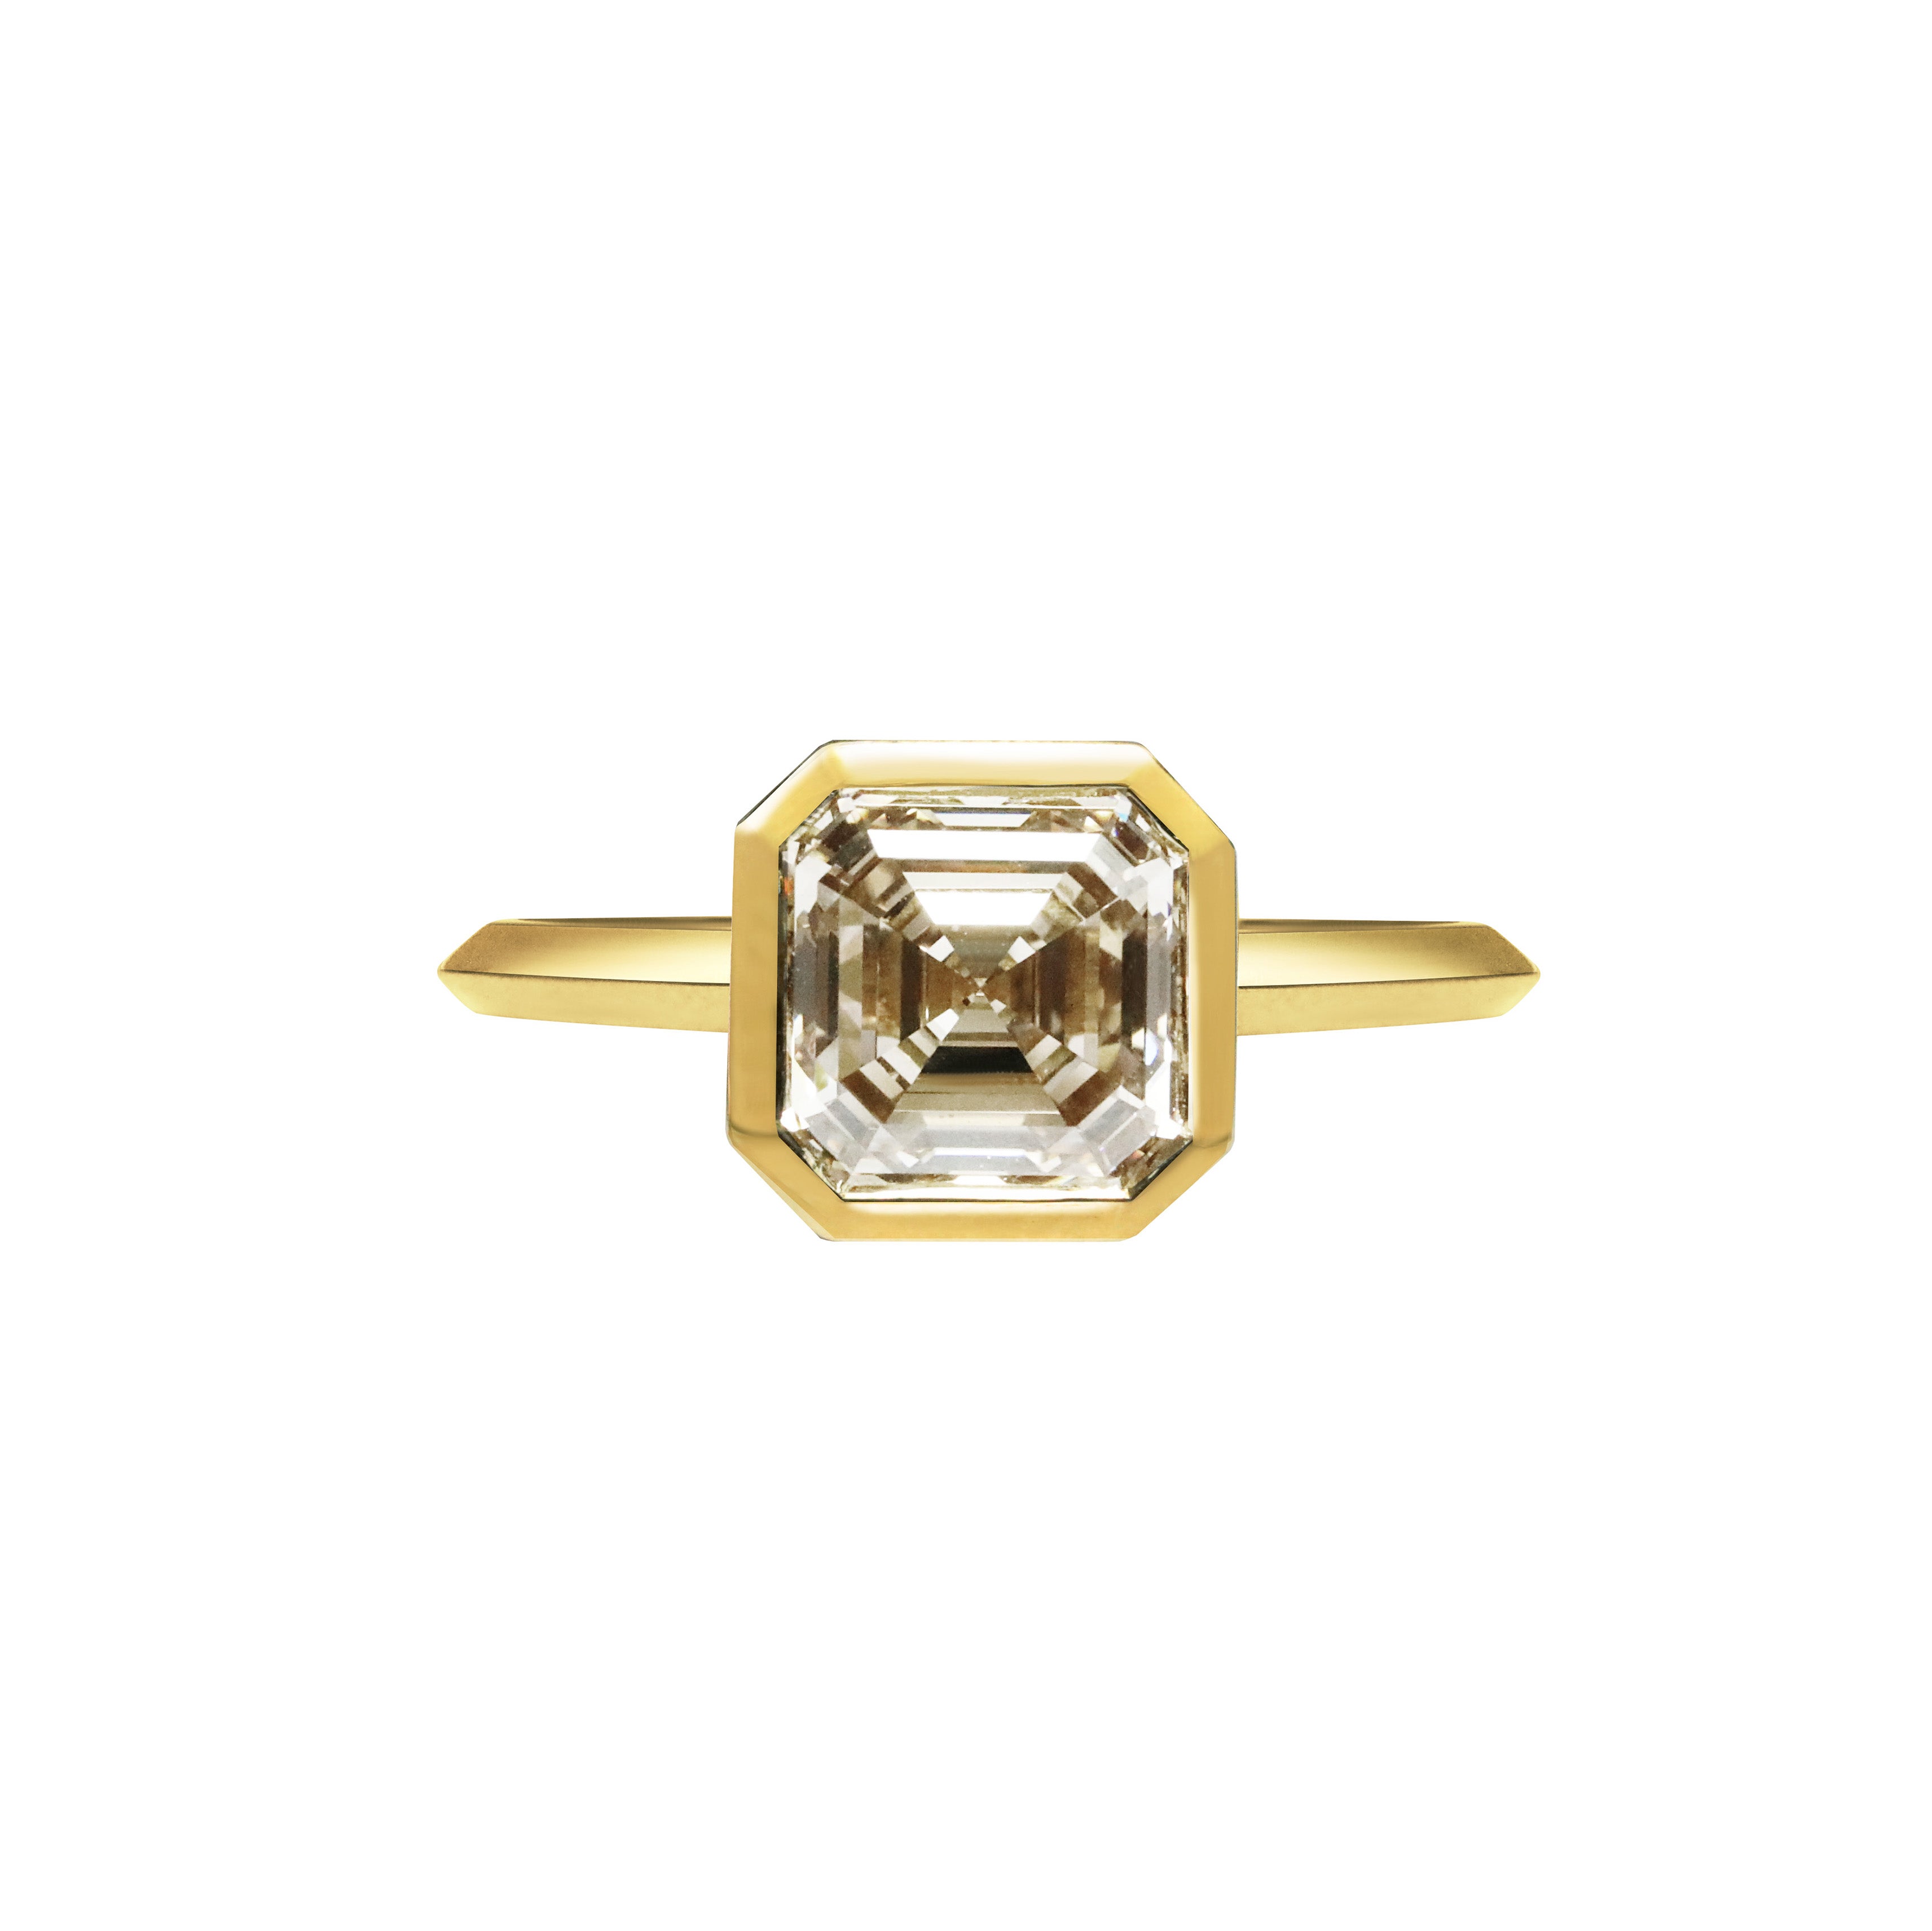 The Hautvilliers Ring by East London jeweller Rachel Boston | Discover our collections of unique and timeless engagement rings, wedding rings, and modern fine jewellery.